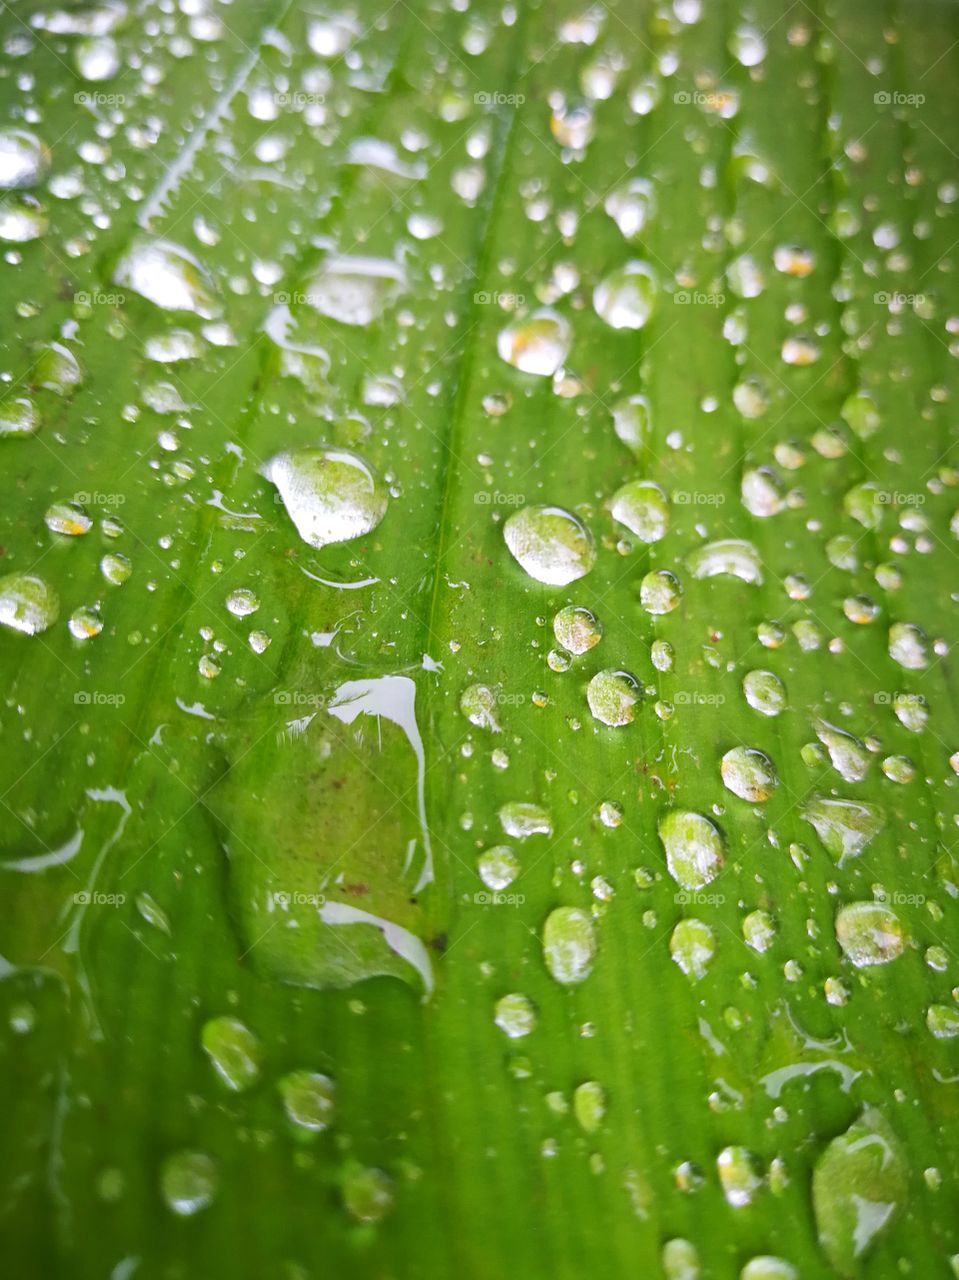 Green banana leaf with water drop.